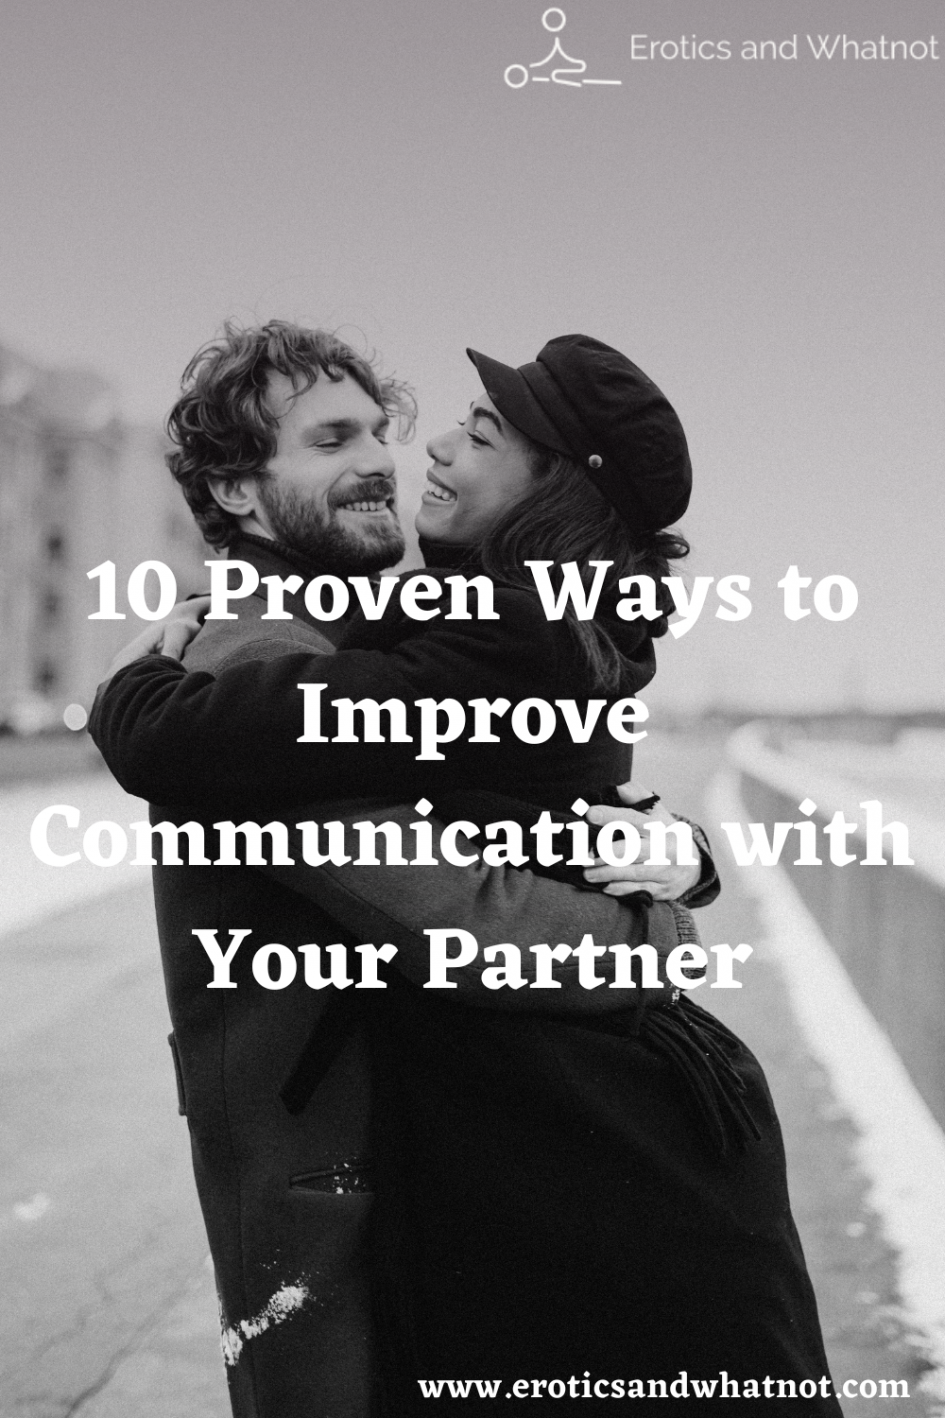 A picture of a blog post of 10 proven ways to improve communication with your partner.